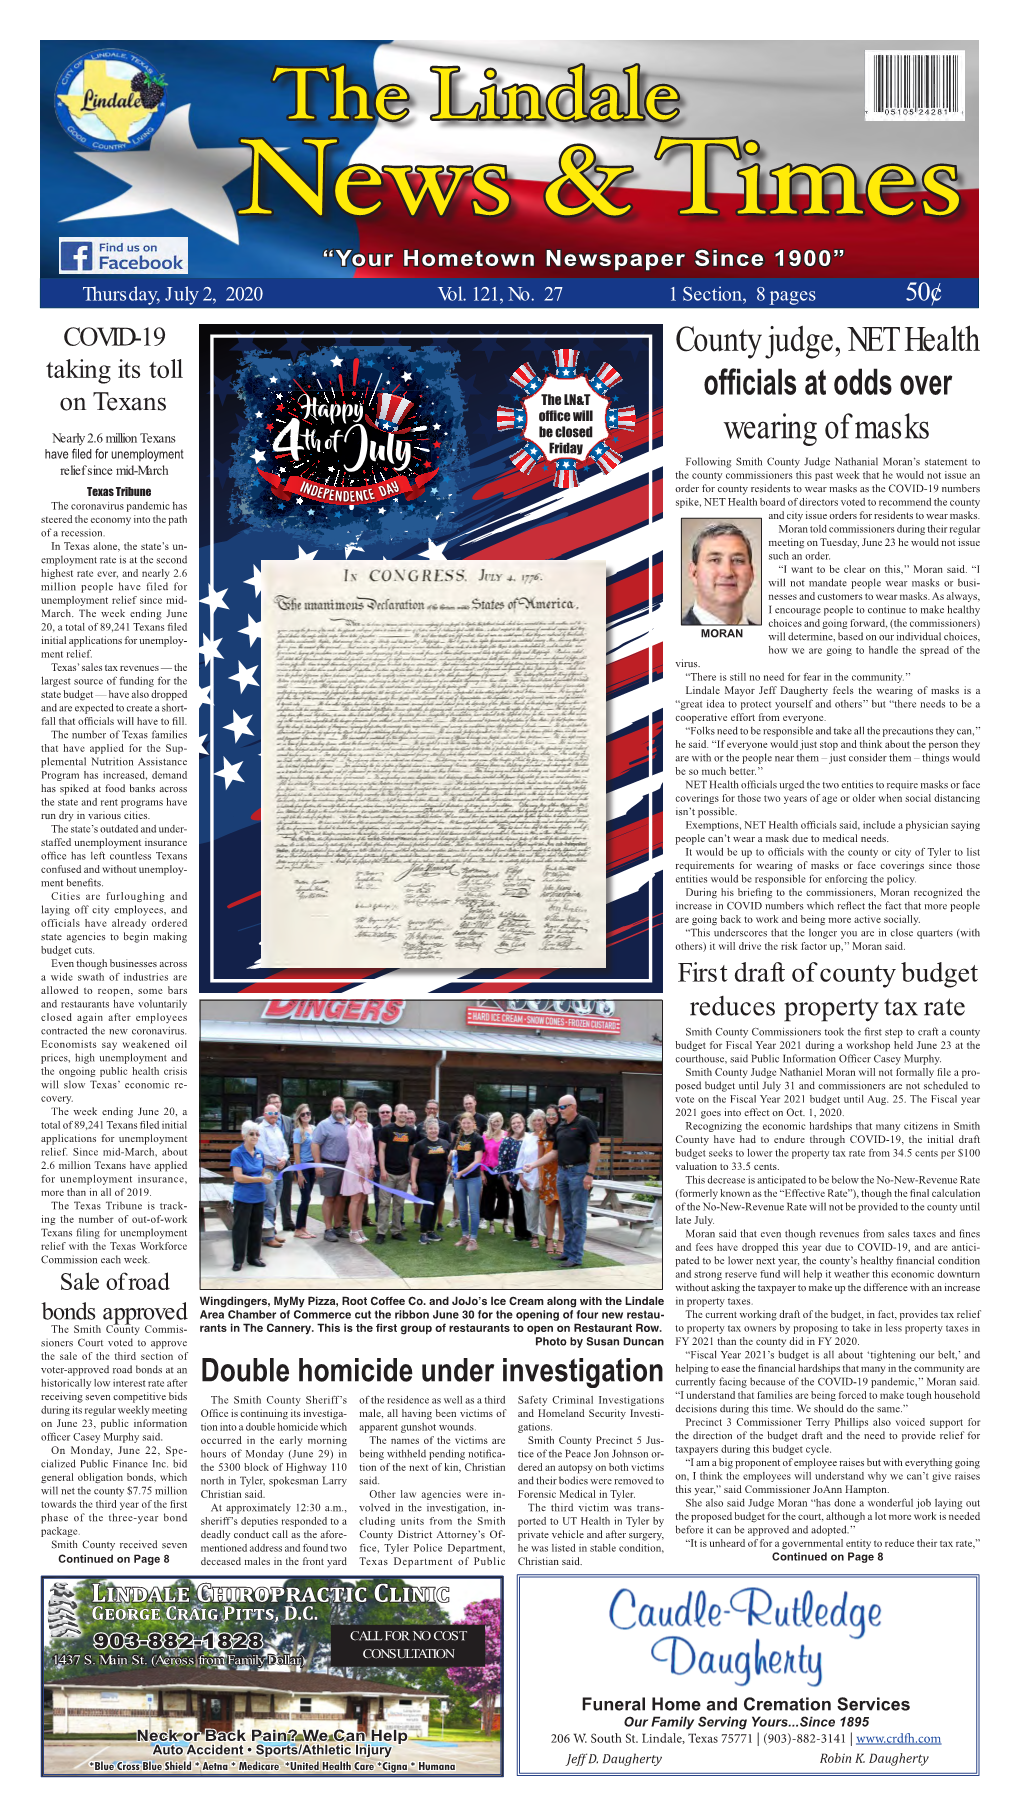 The Lindale News & Times “Your Hometown Newspaper Since 1900” Thursday, July 2, 2020 Vol